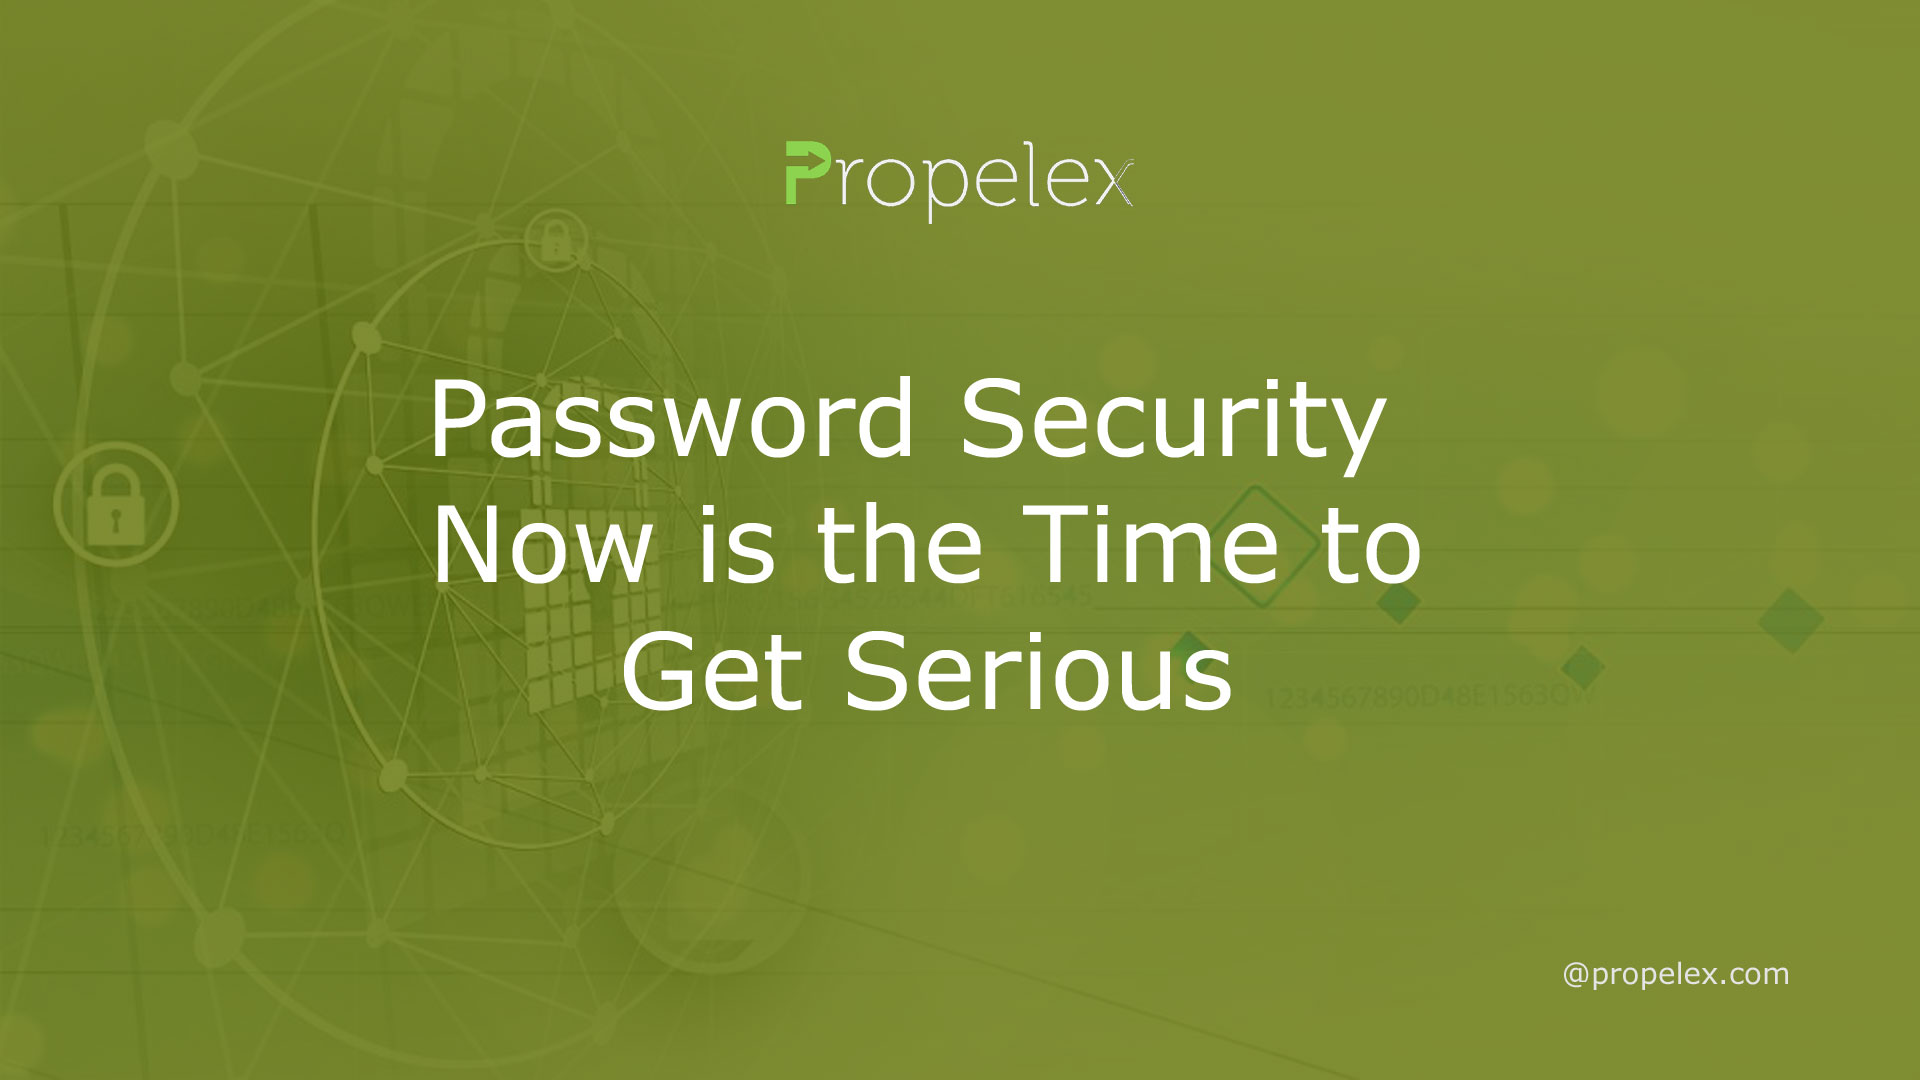 Password Security Now is the Time to Get Serious